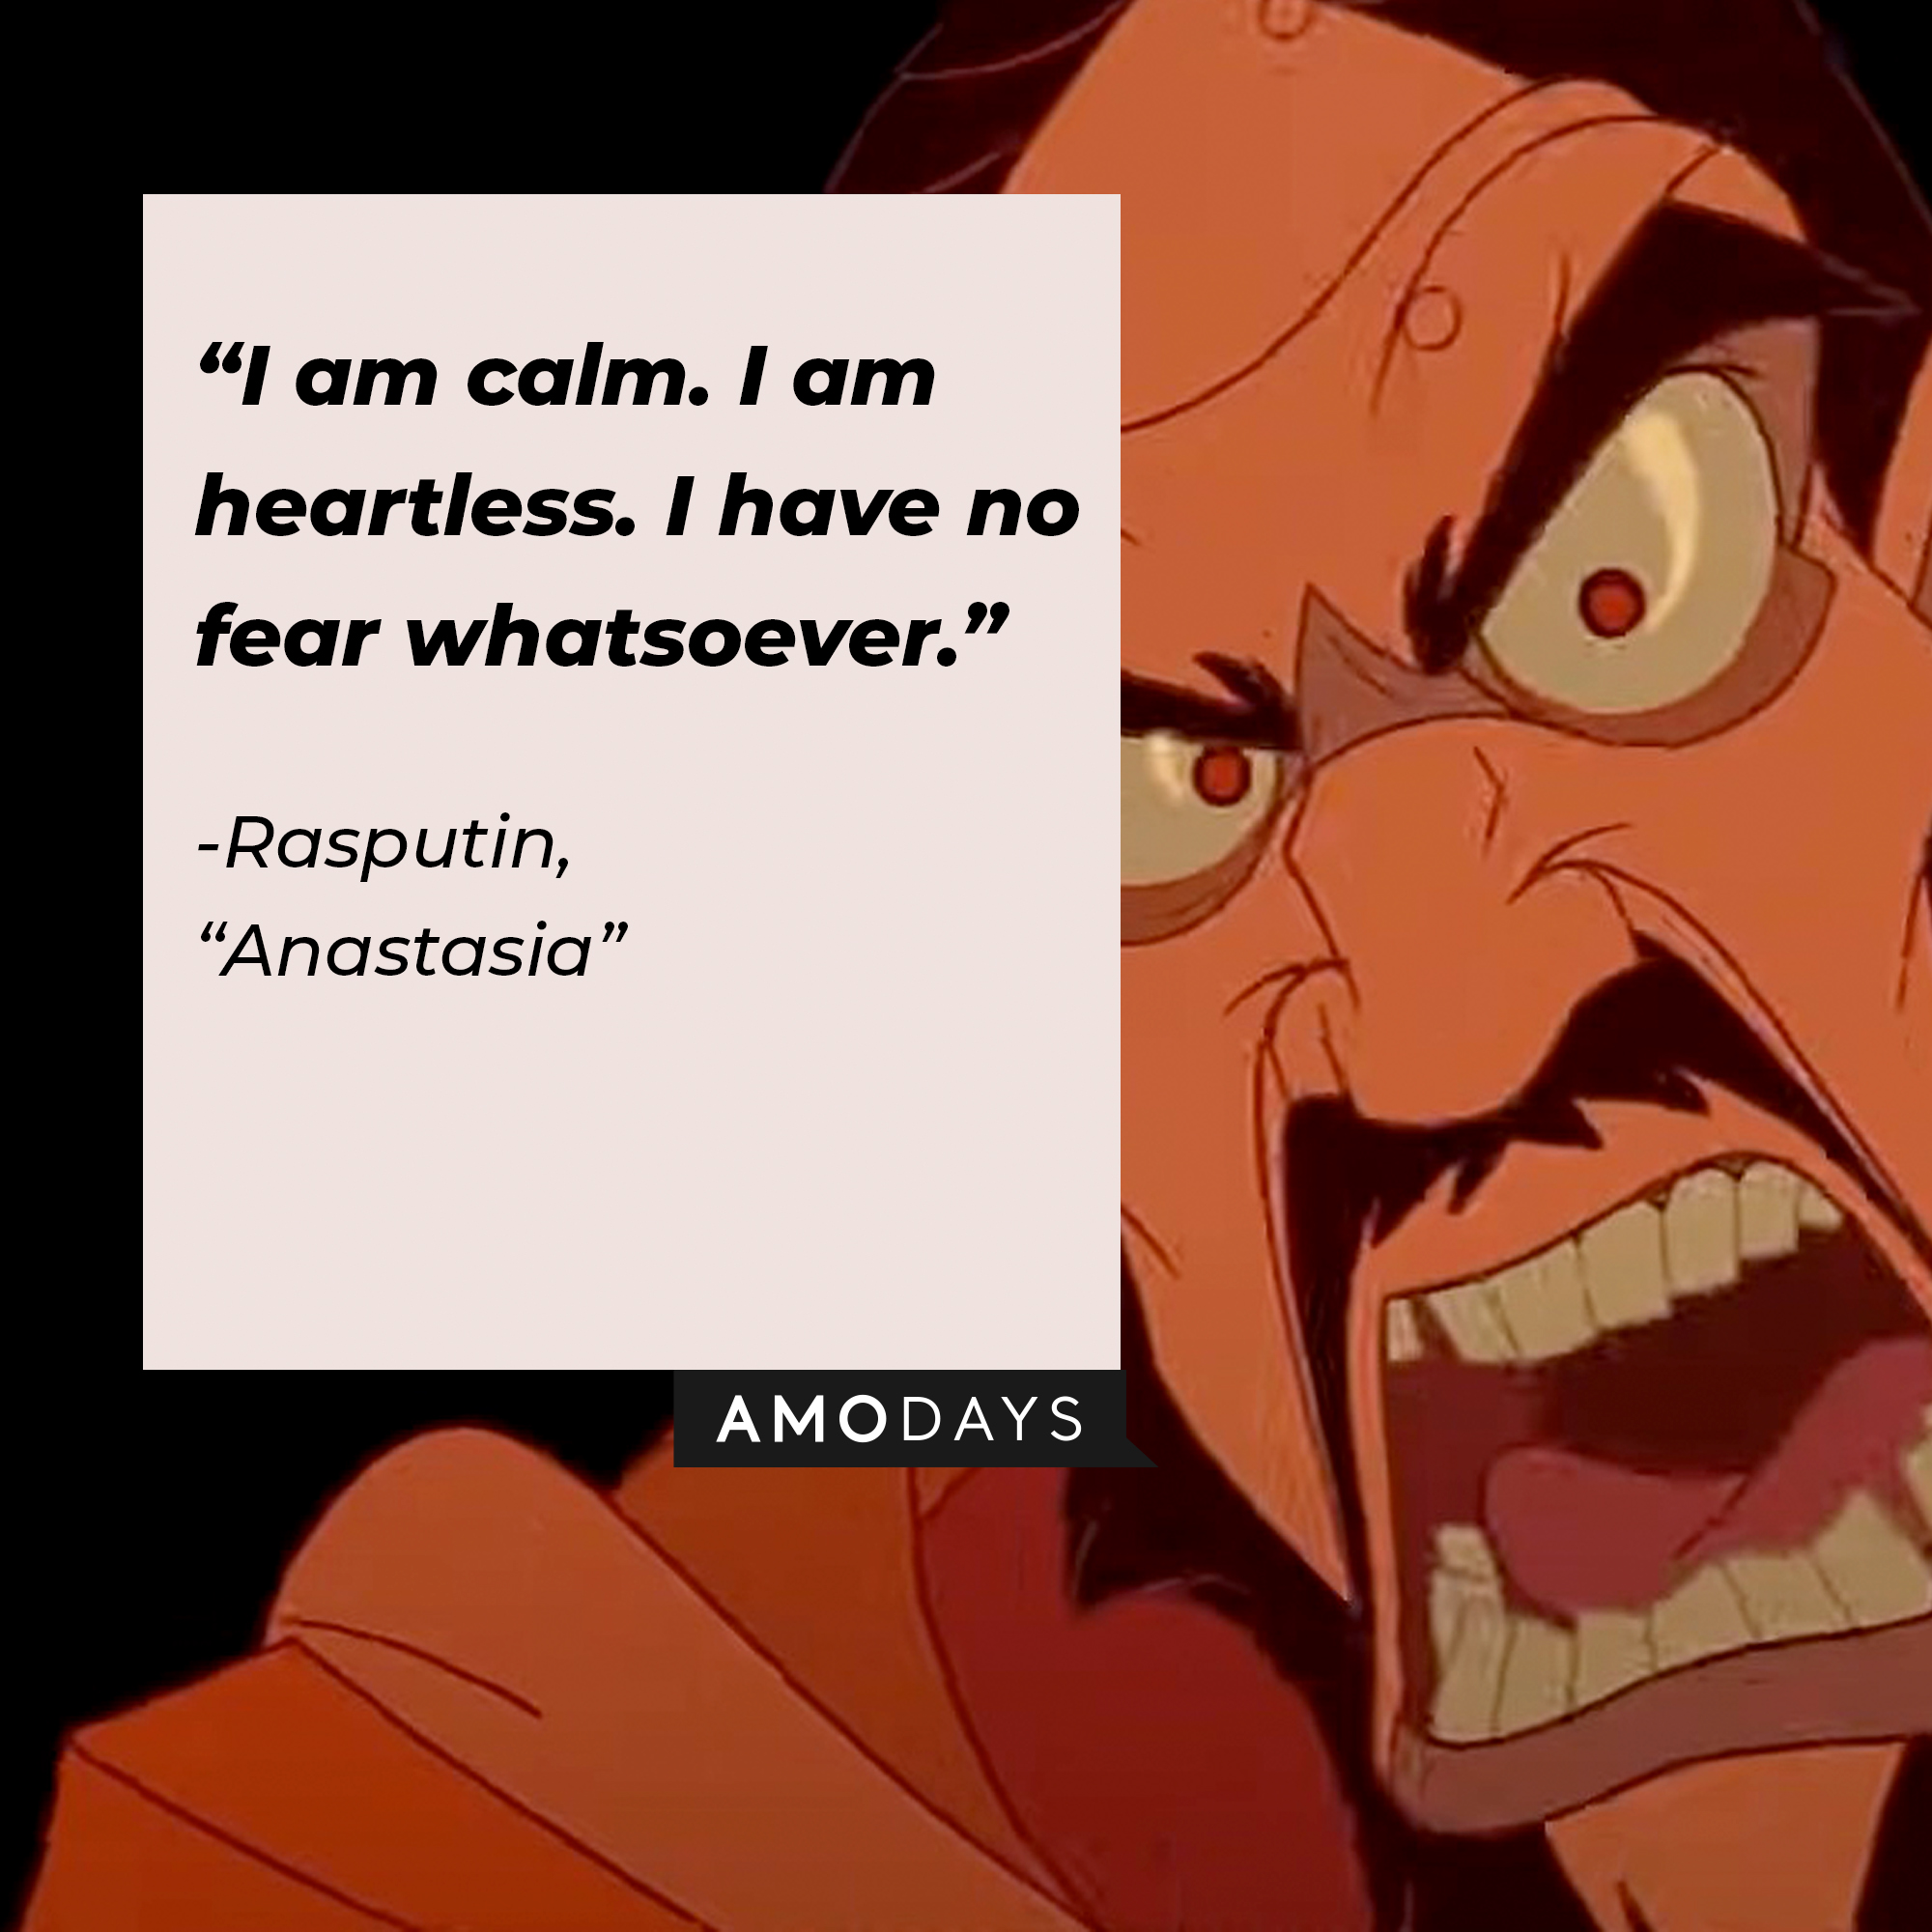 Image of Rasputin with the quote: “I am calm. I am heartless. I have no fear whatsoever.” | Source: Youtube.com/20thCenturyStudios